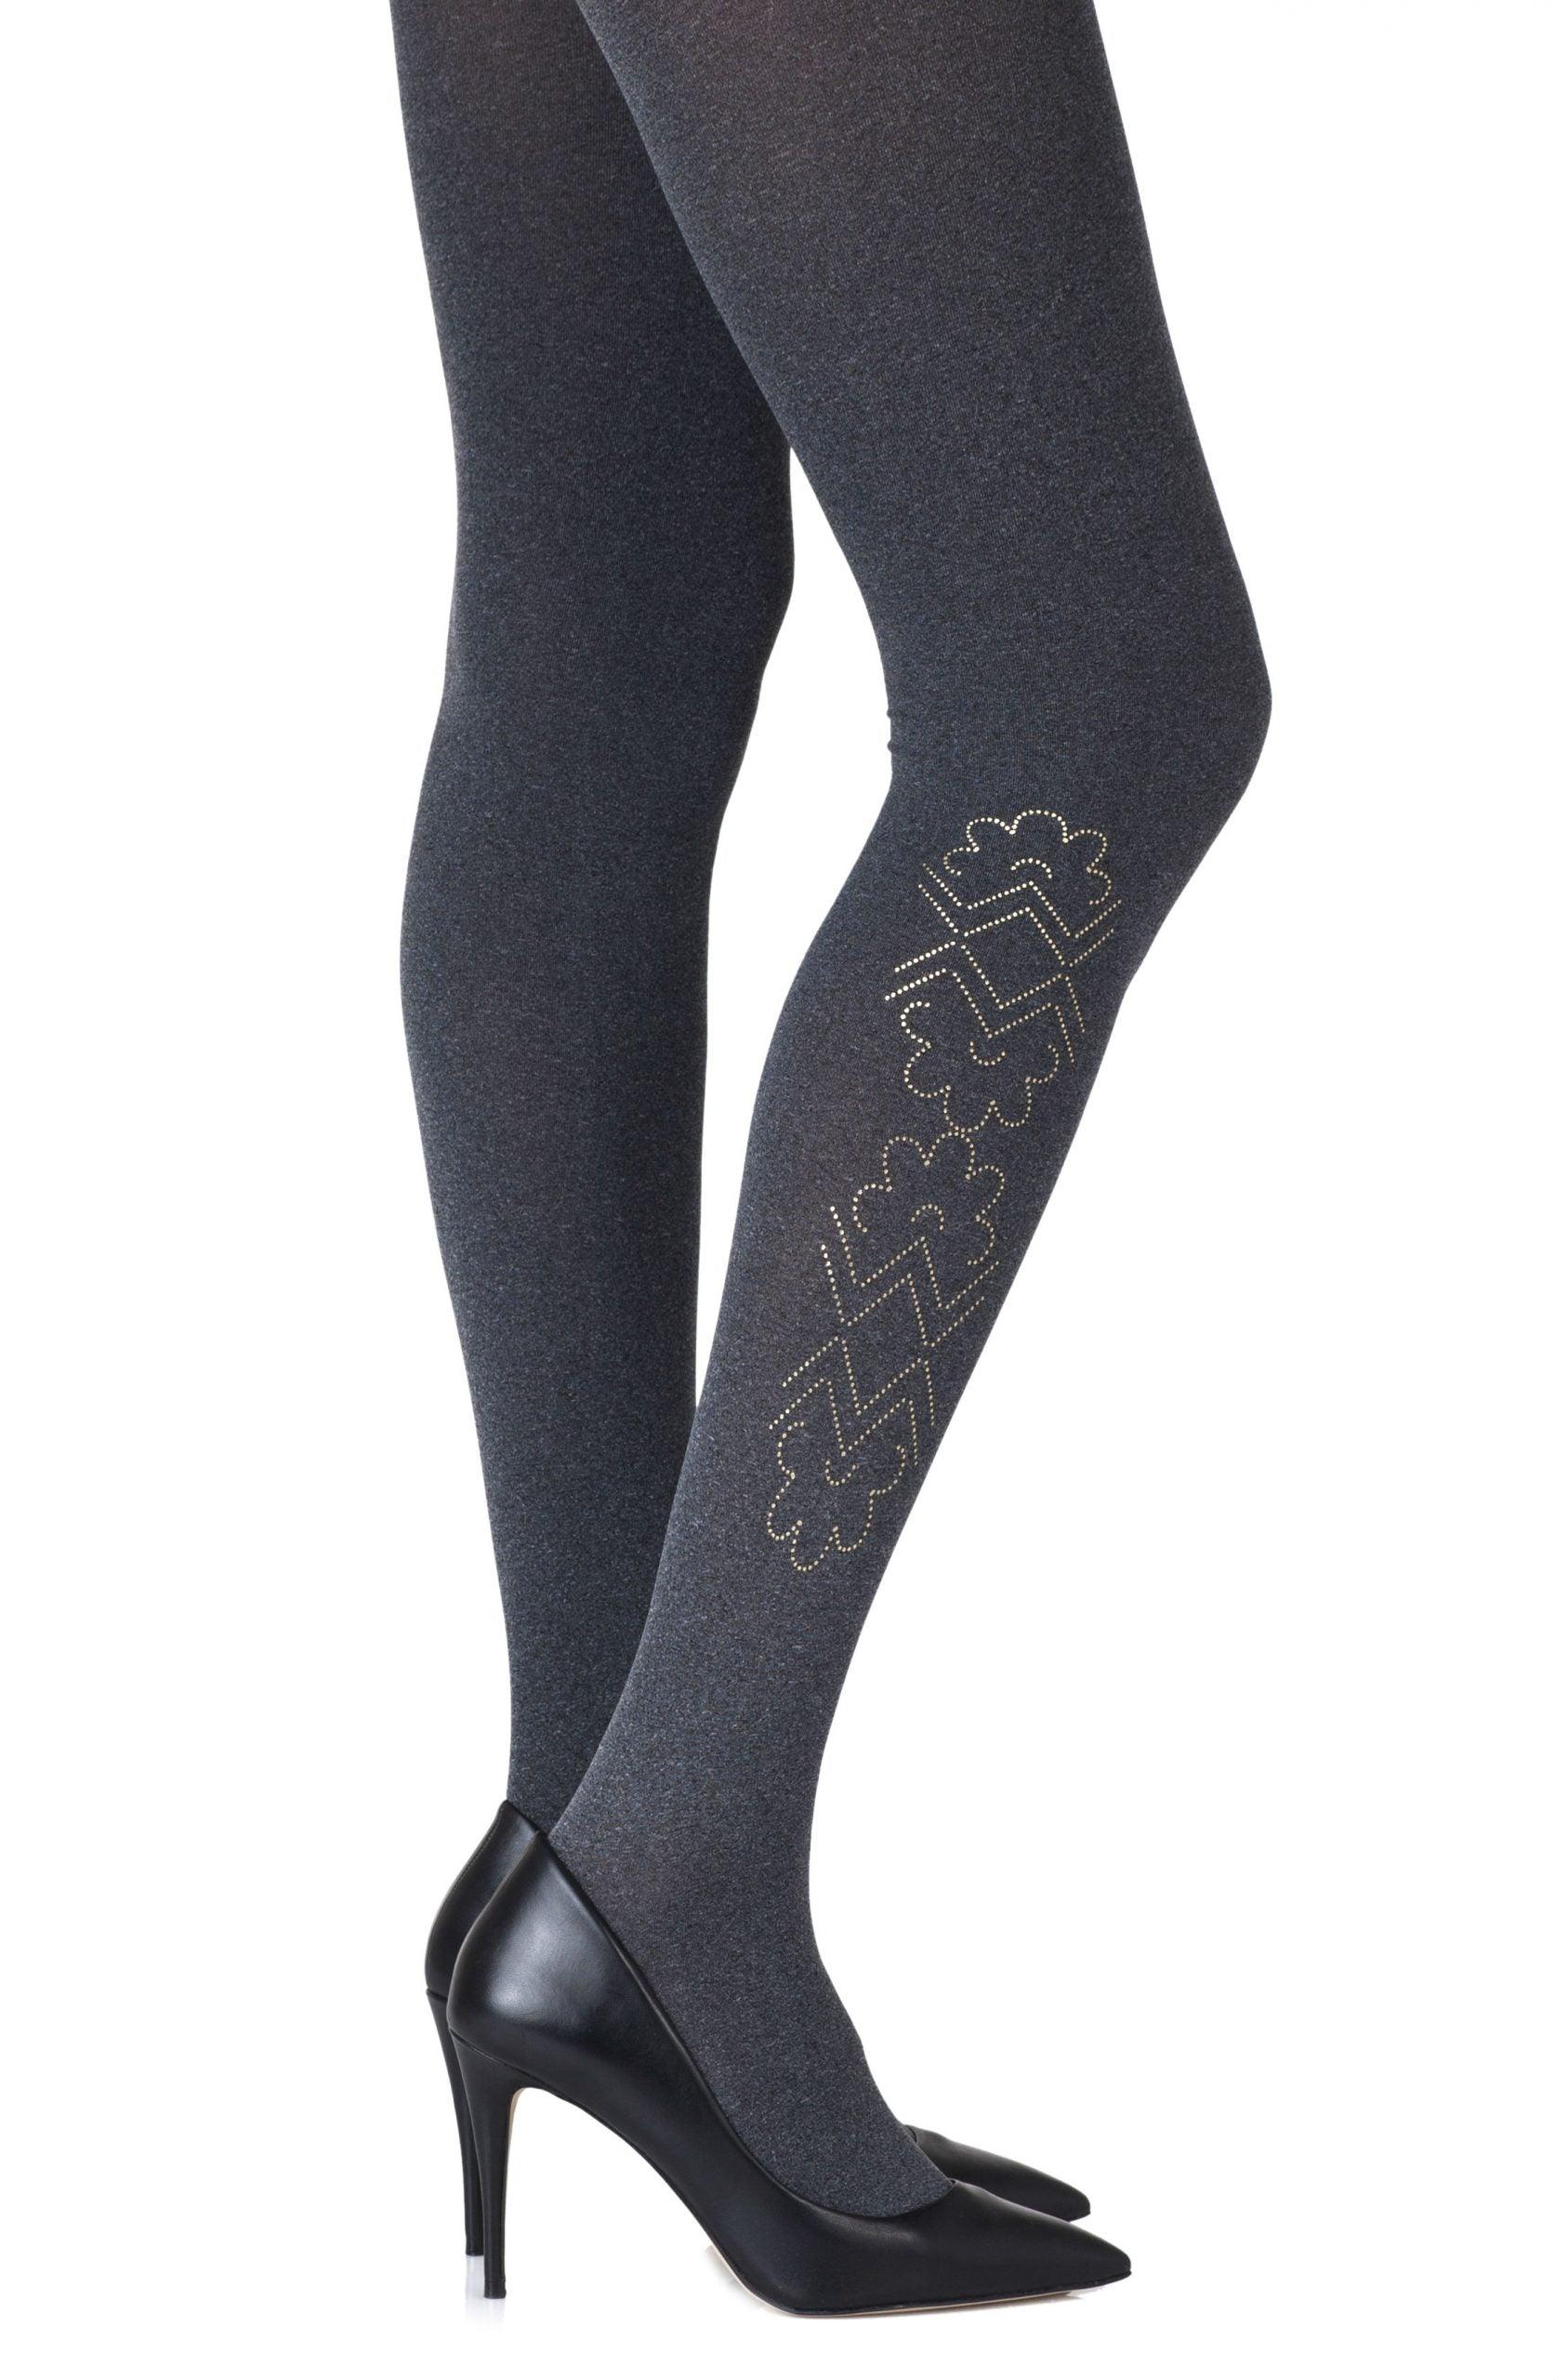 Zohara &quot;Caught In The Metal&quot; Heather Grey Print Tights - Sydney Rose Lingerie 